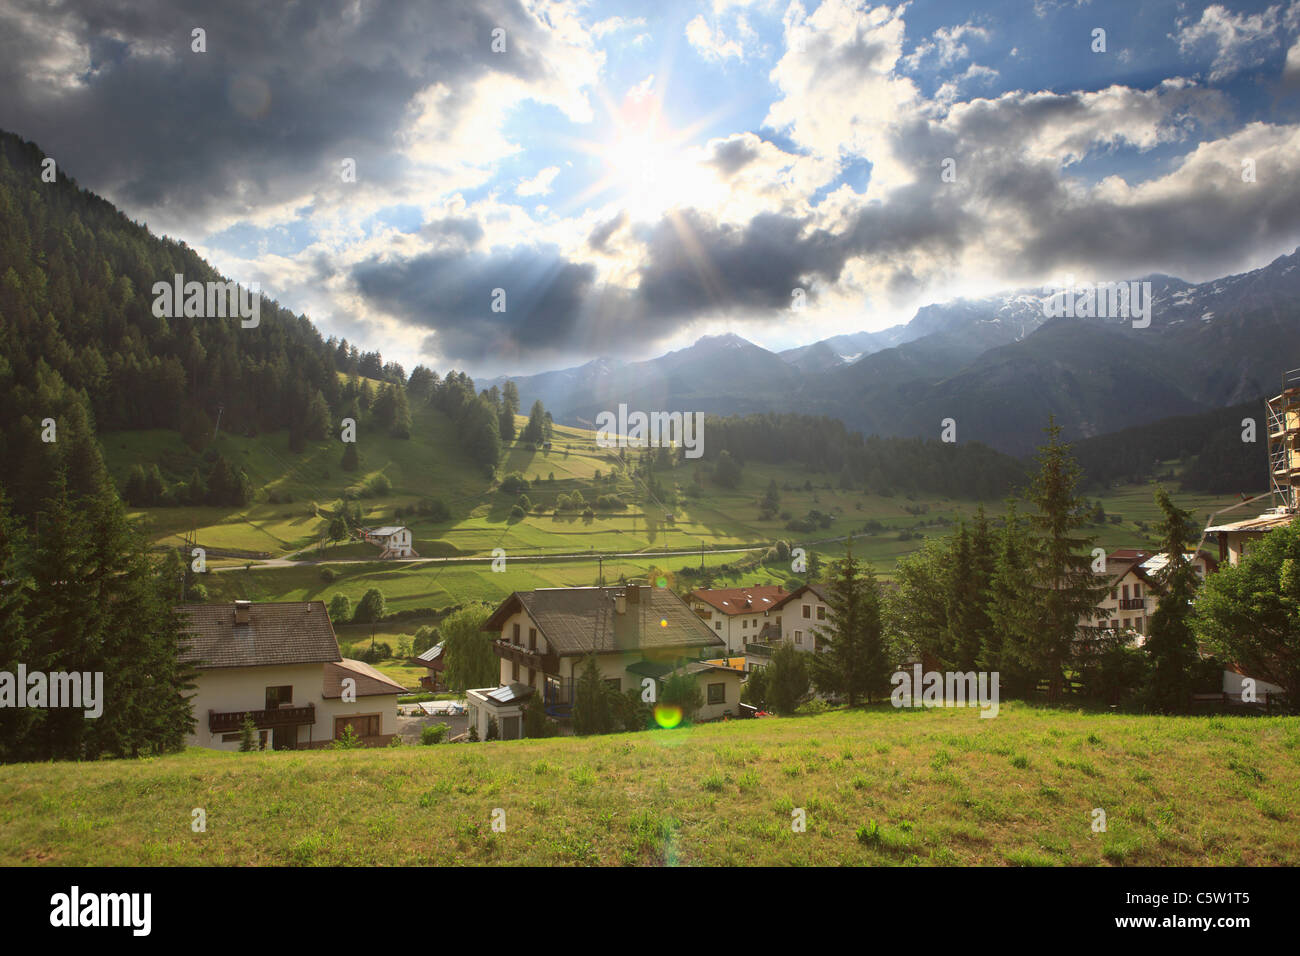 Austria, Tyrol, Nauders, View of village with mountains in background Stock Photo